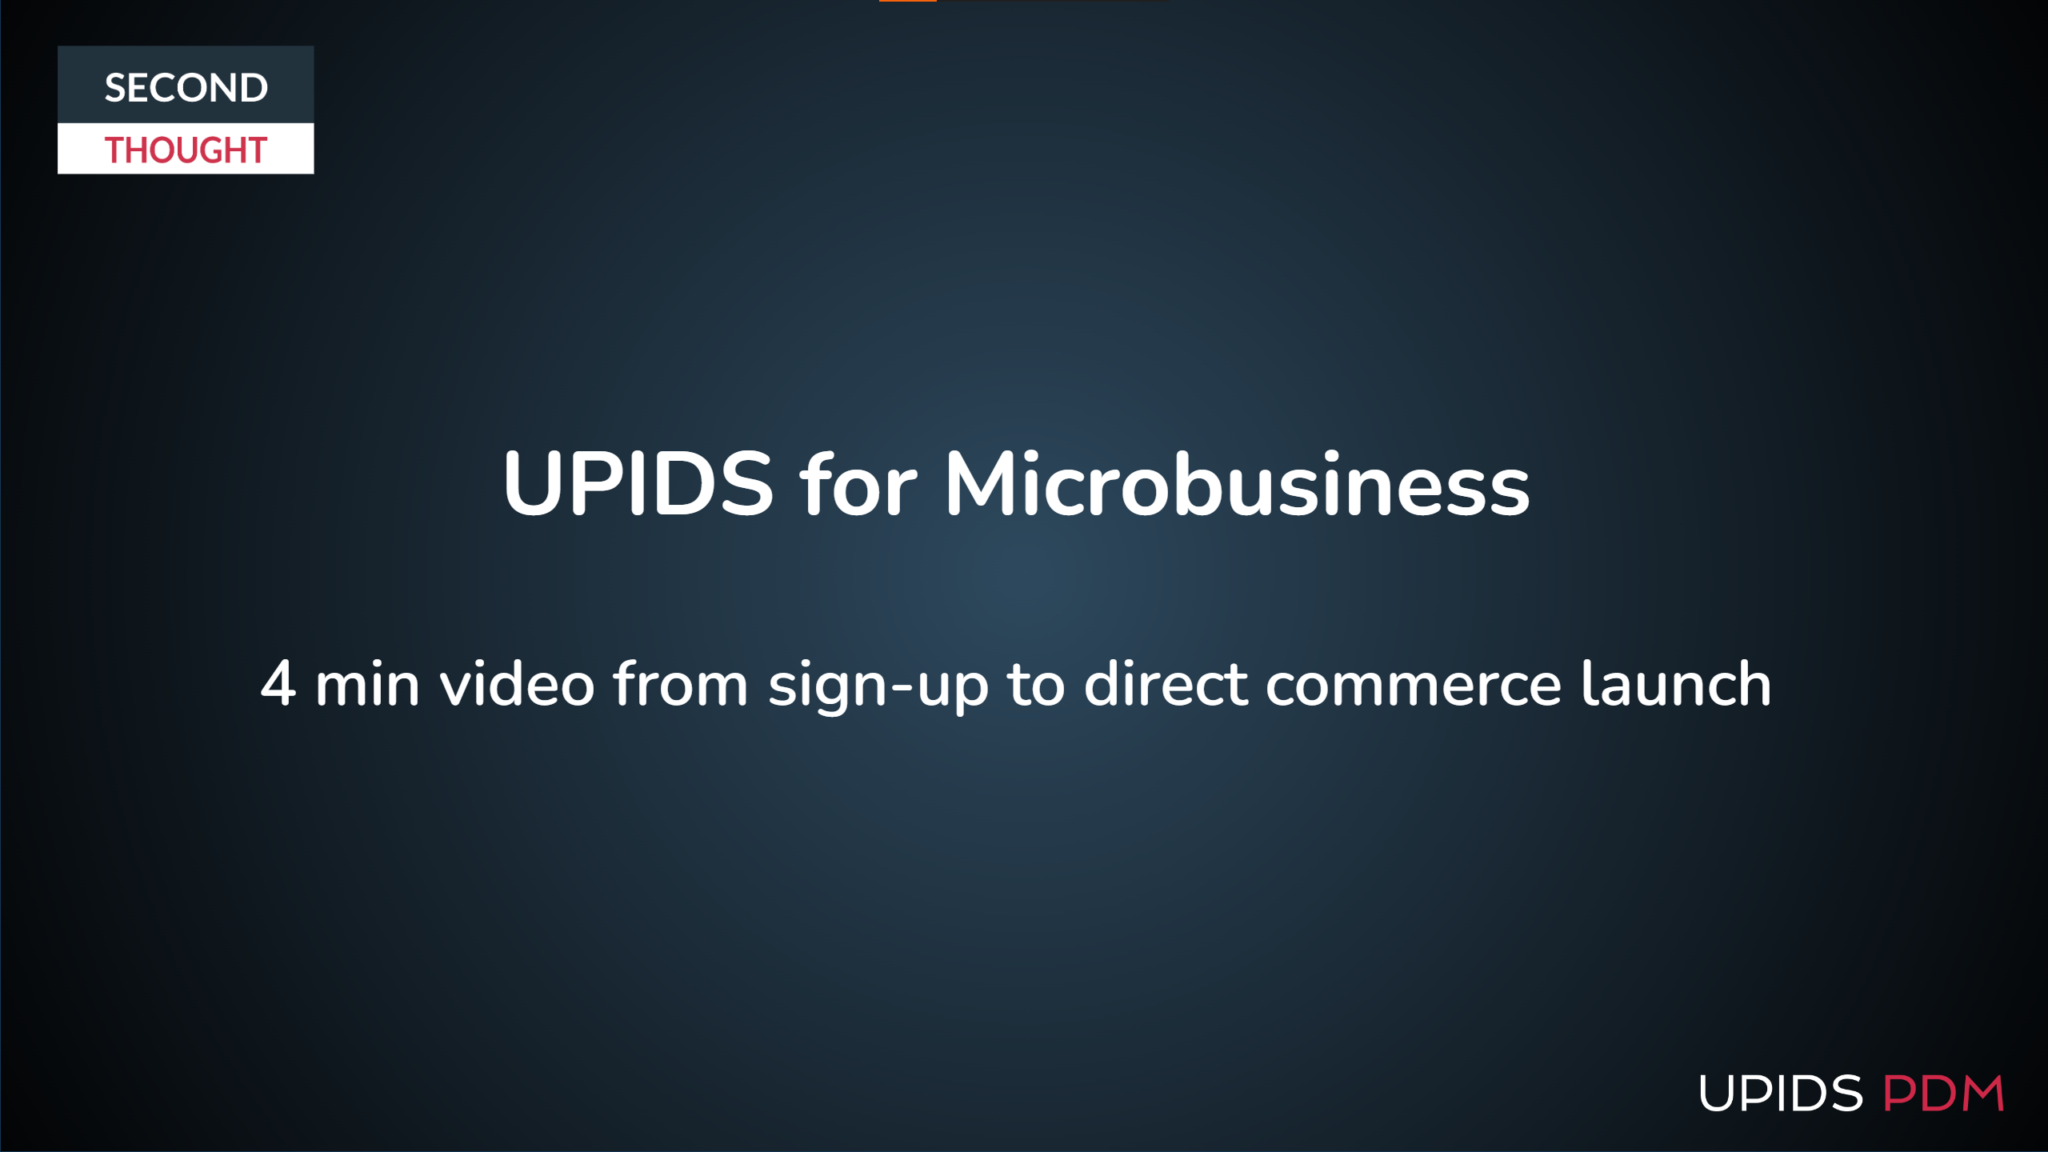 UPIDS for Microbusiness